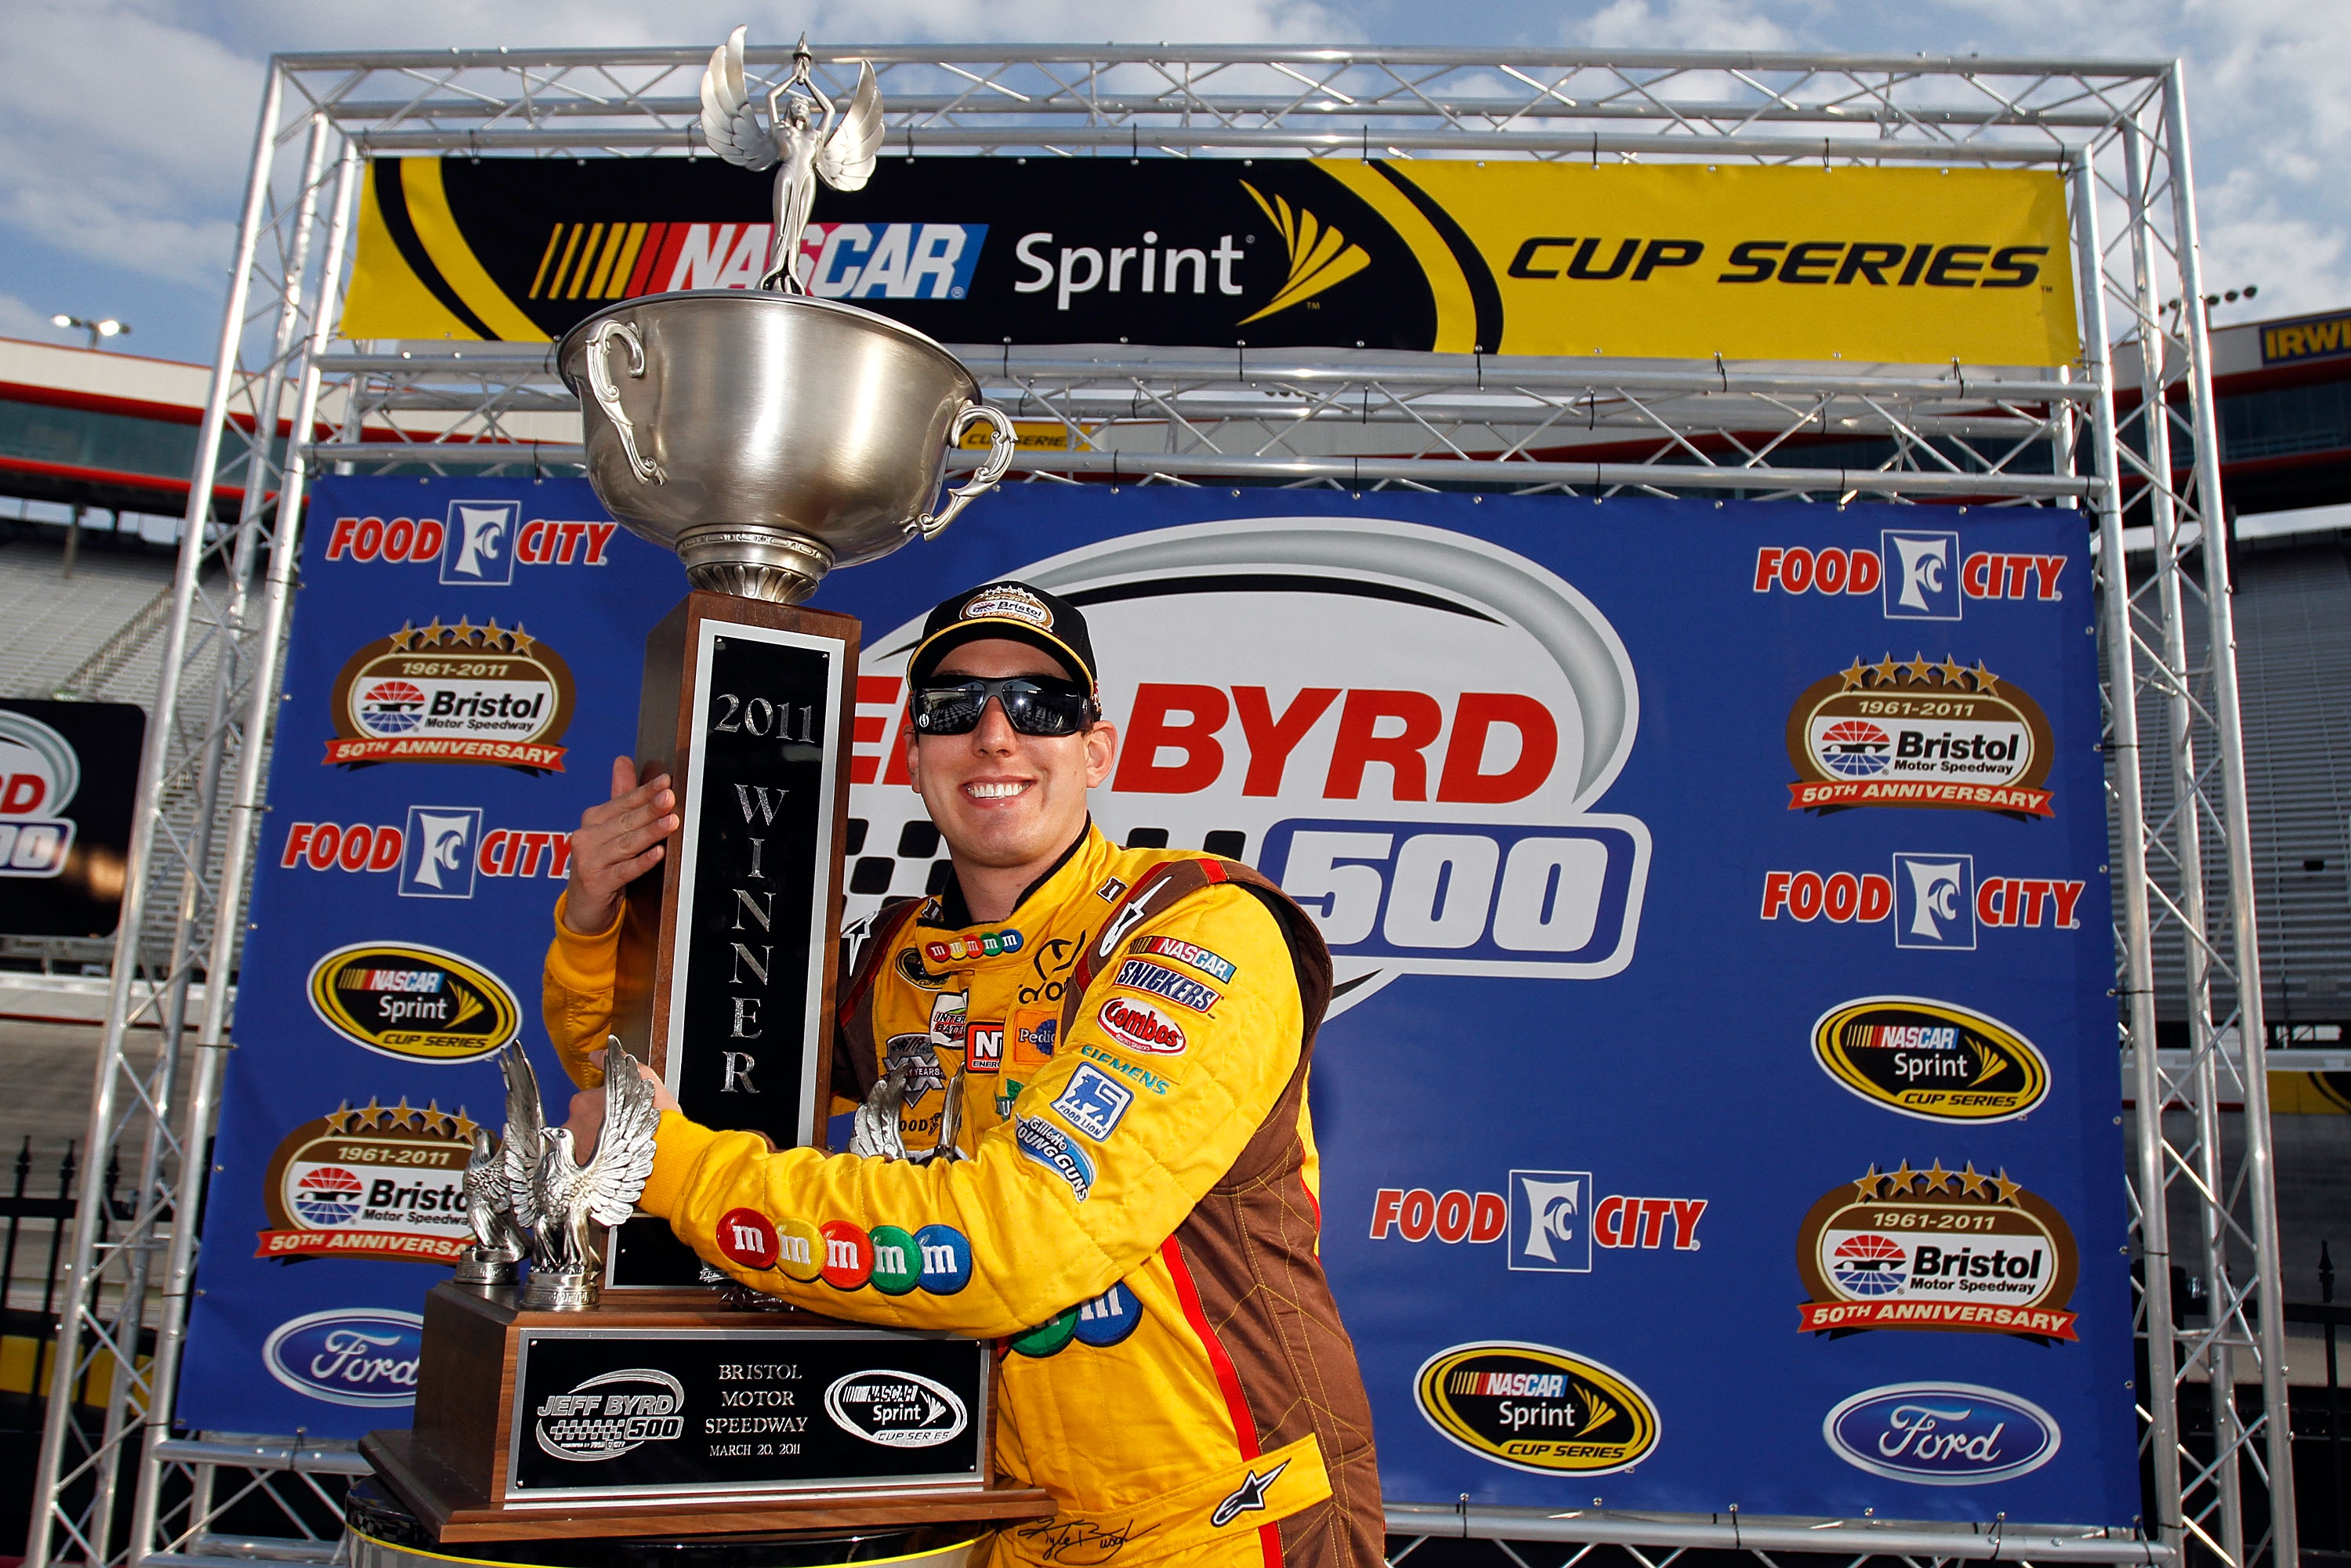 BRISTOL, TN - MARCH 20:   Kyle Busch, driver of the #18 M&M's Toyota, celebrates in Victory Lane after winning the NASCAR Sprint Cup Series Jeff Byrd 500 Presented By Food City at Bristol Motor Speedway on March 20, 2011 in Bristol, Tennessee.  (Photo by